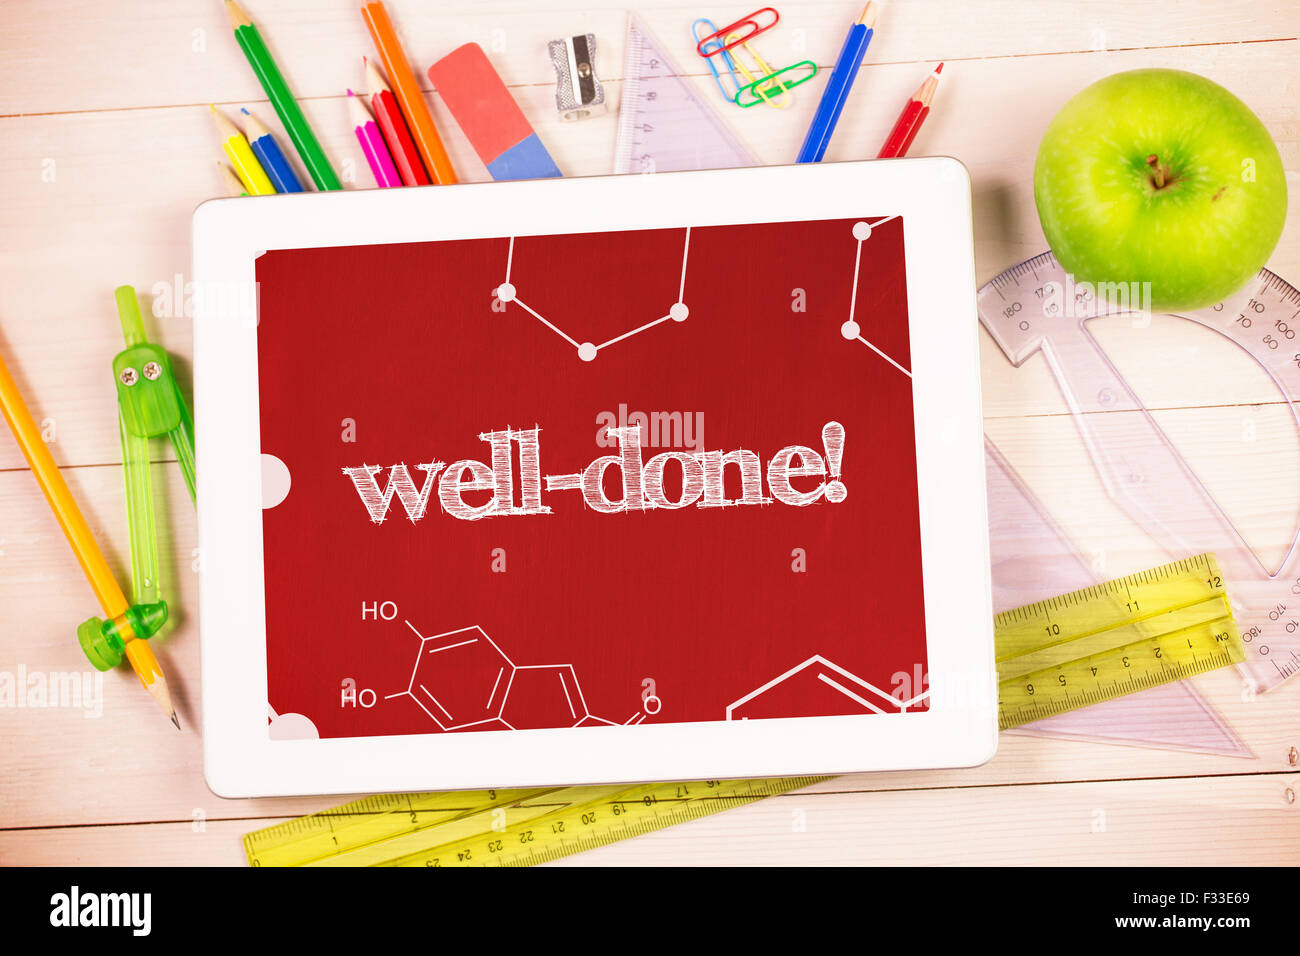 Well-done! against students desk with tablet pc Stock Photo